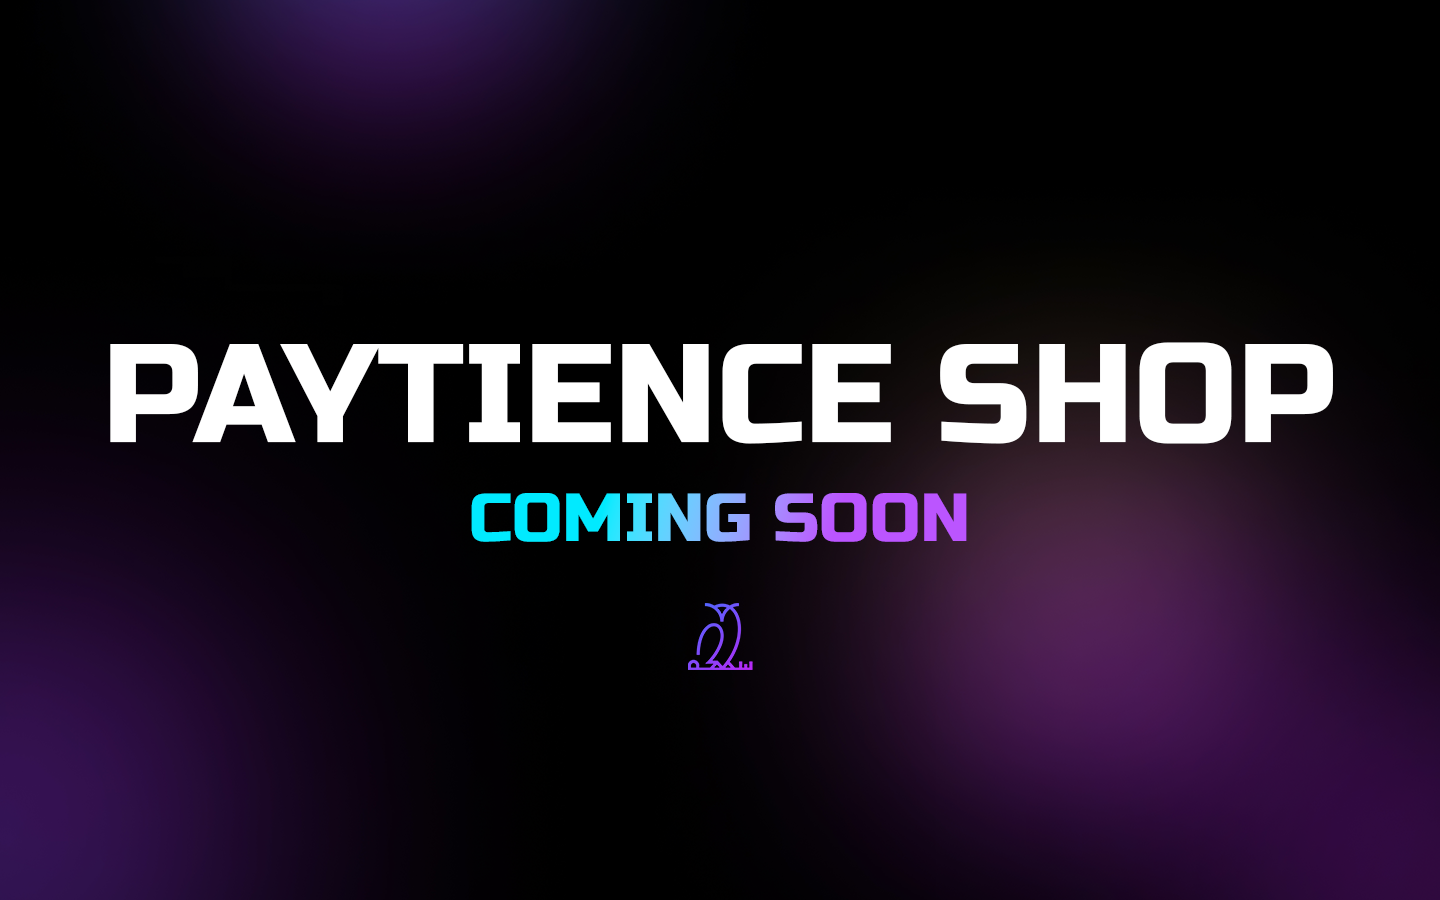 Paytience Shop Coming Soon